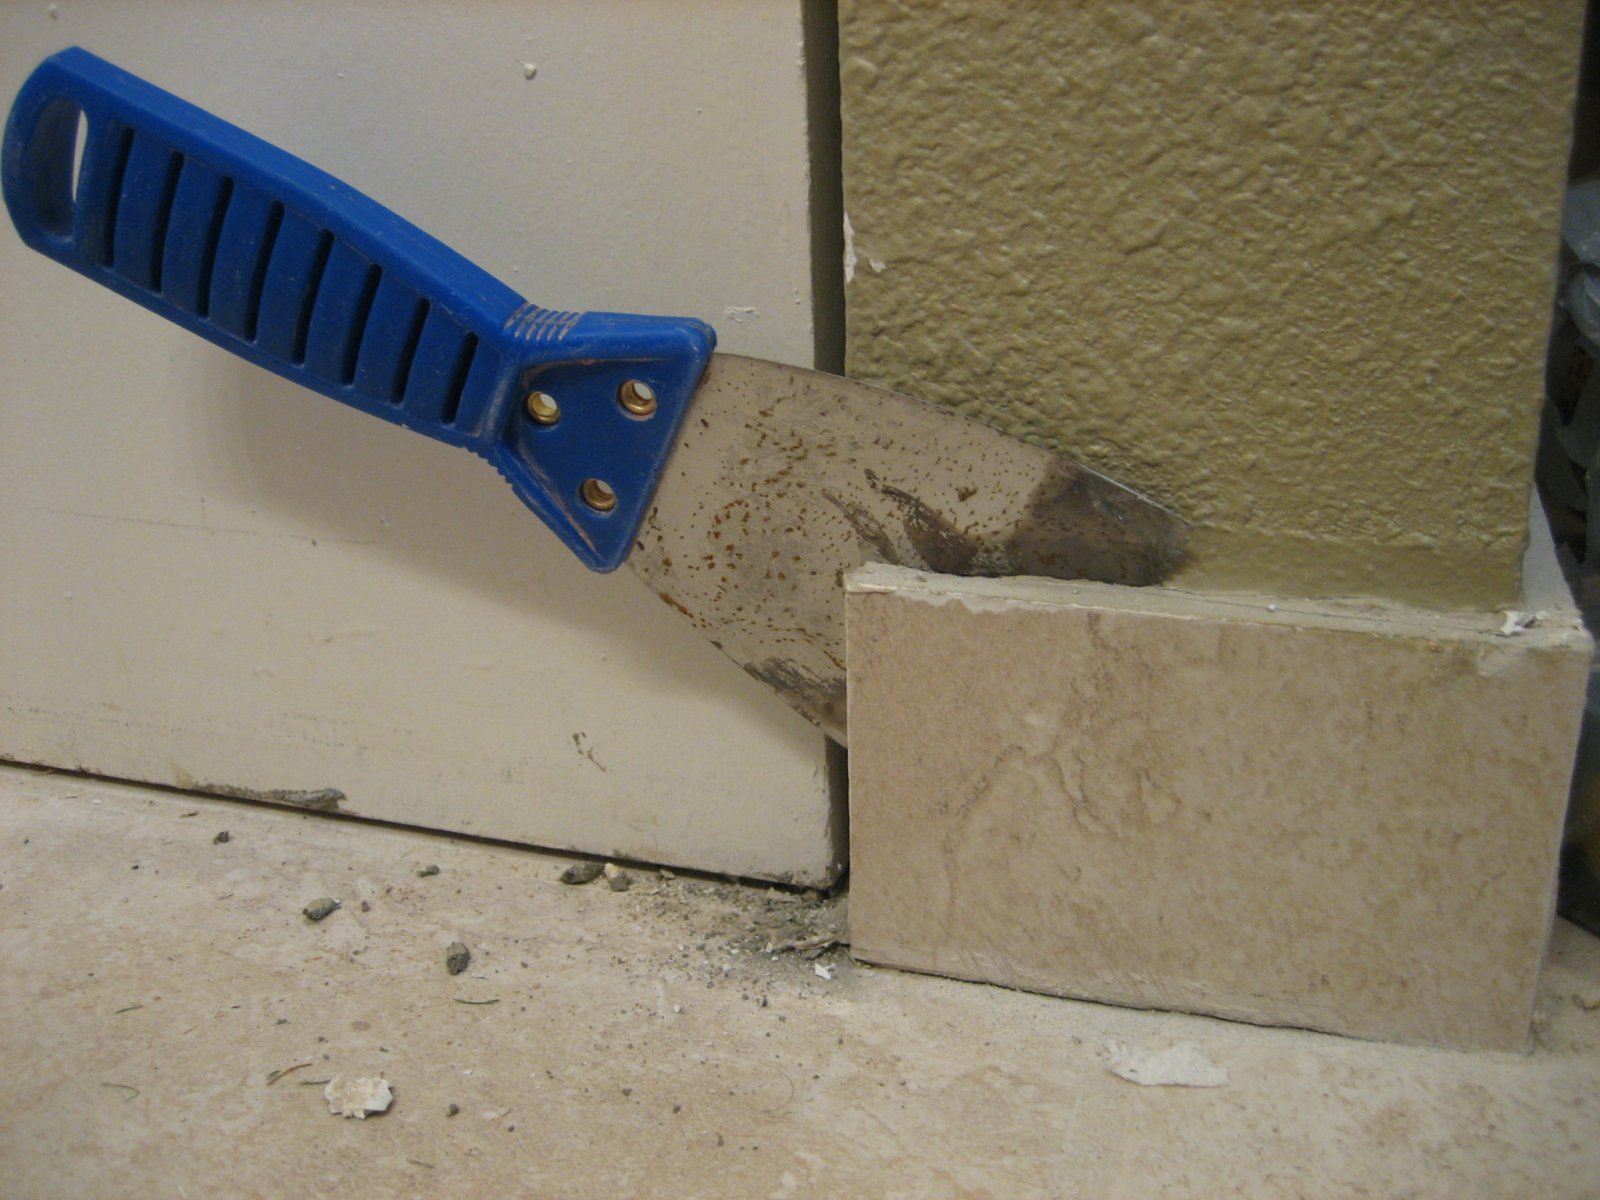 How To Remove Floor Tiles Without, Removing Floor Tiles Without Breaking Them